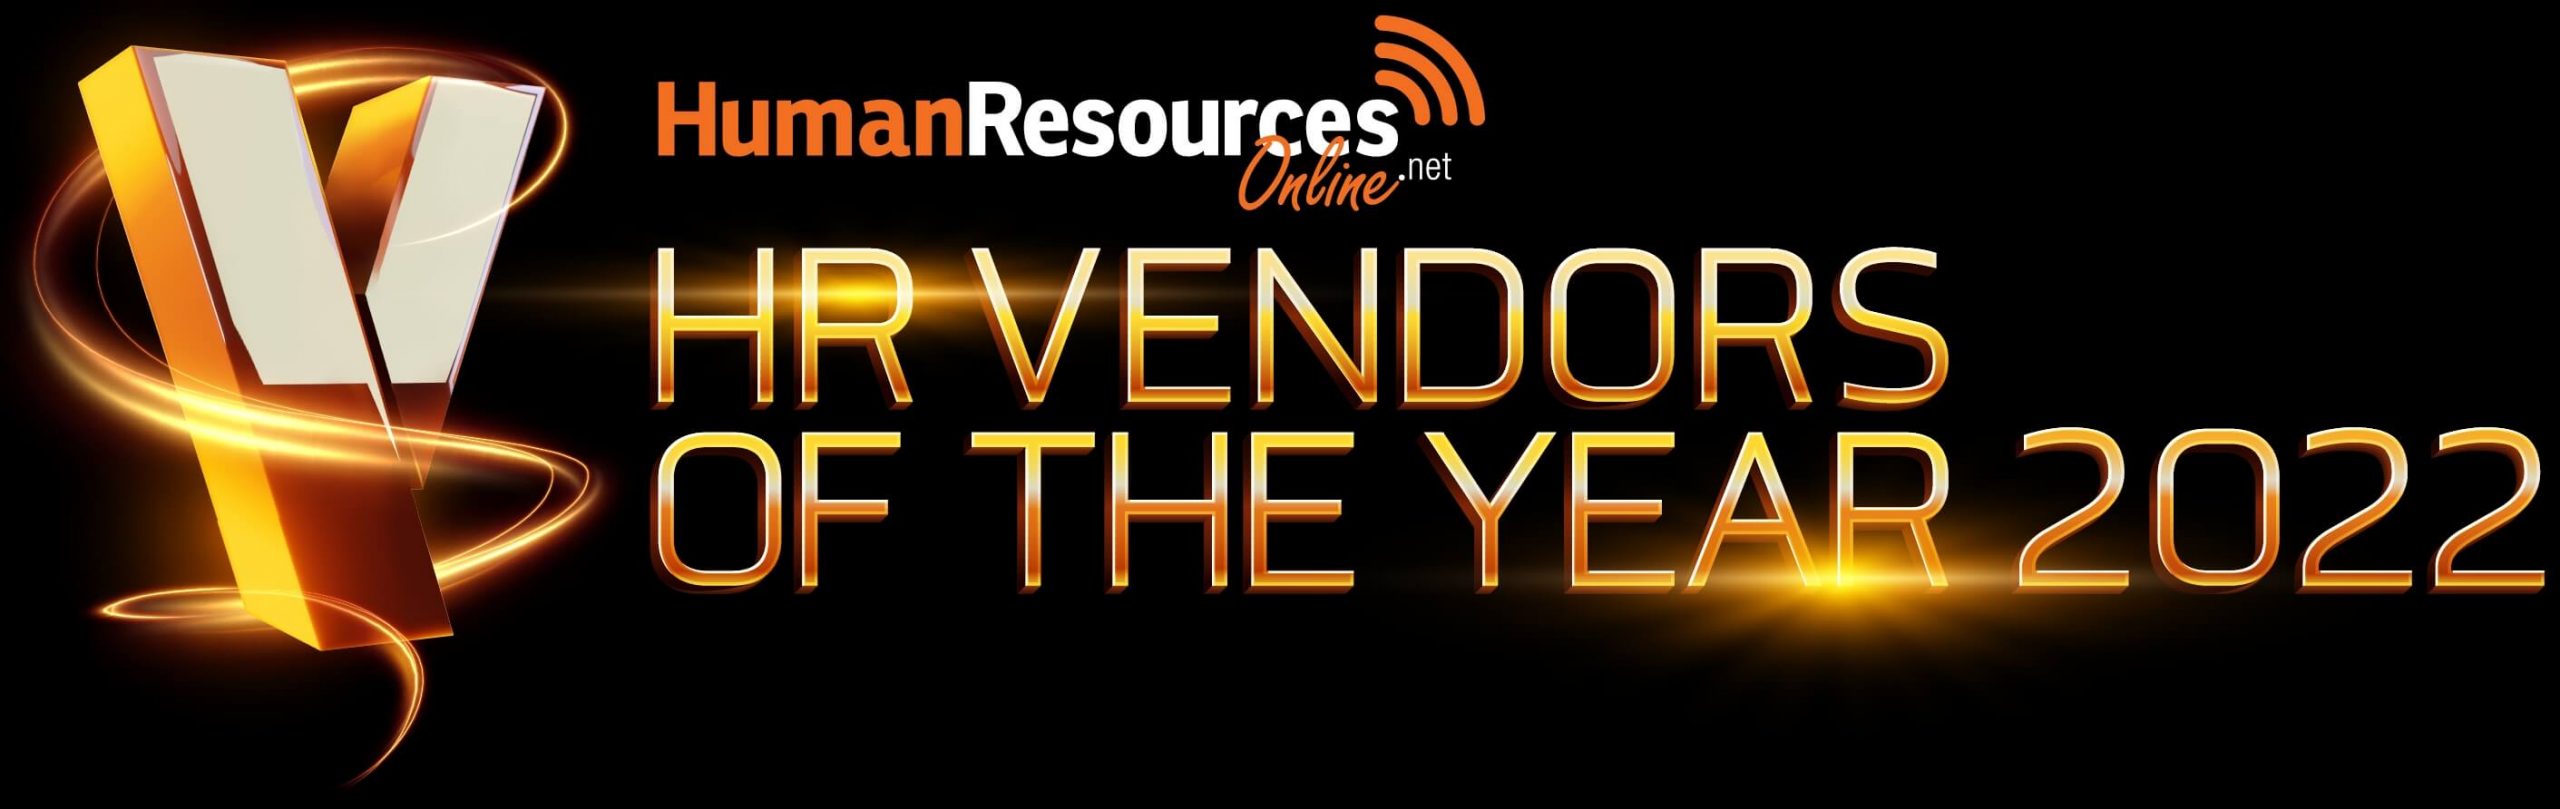 HR Vendors of the Year 2022 Singapore